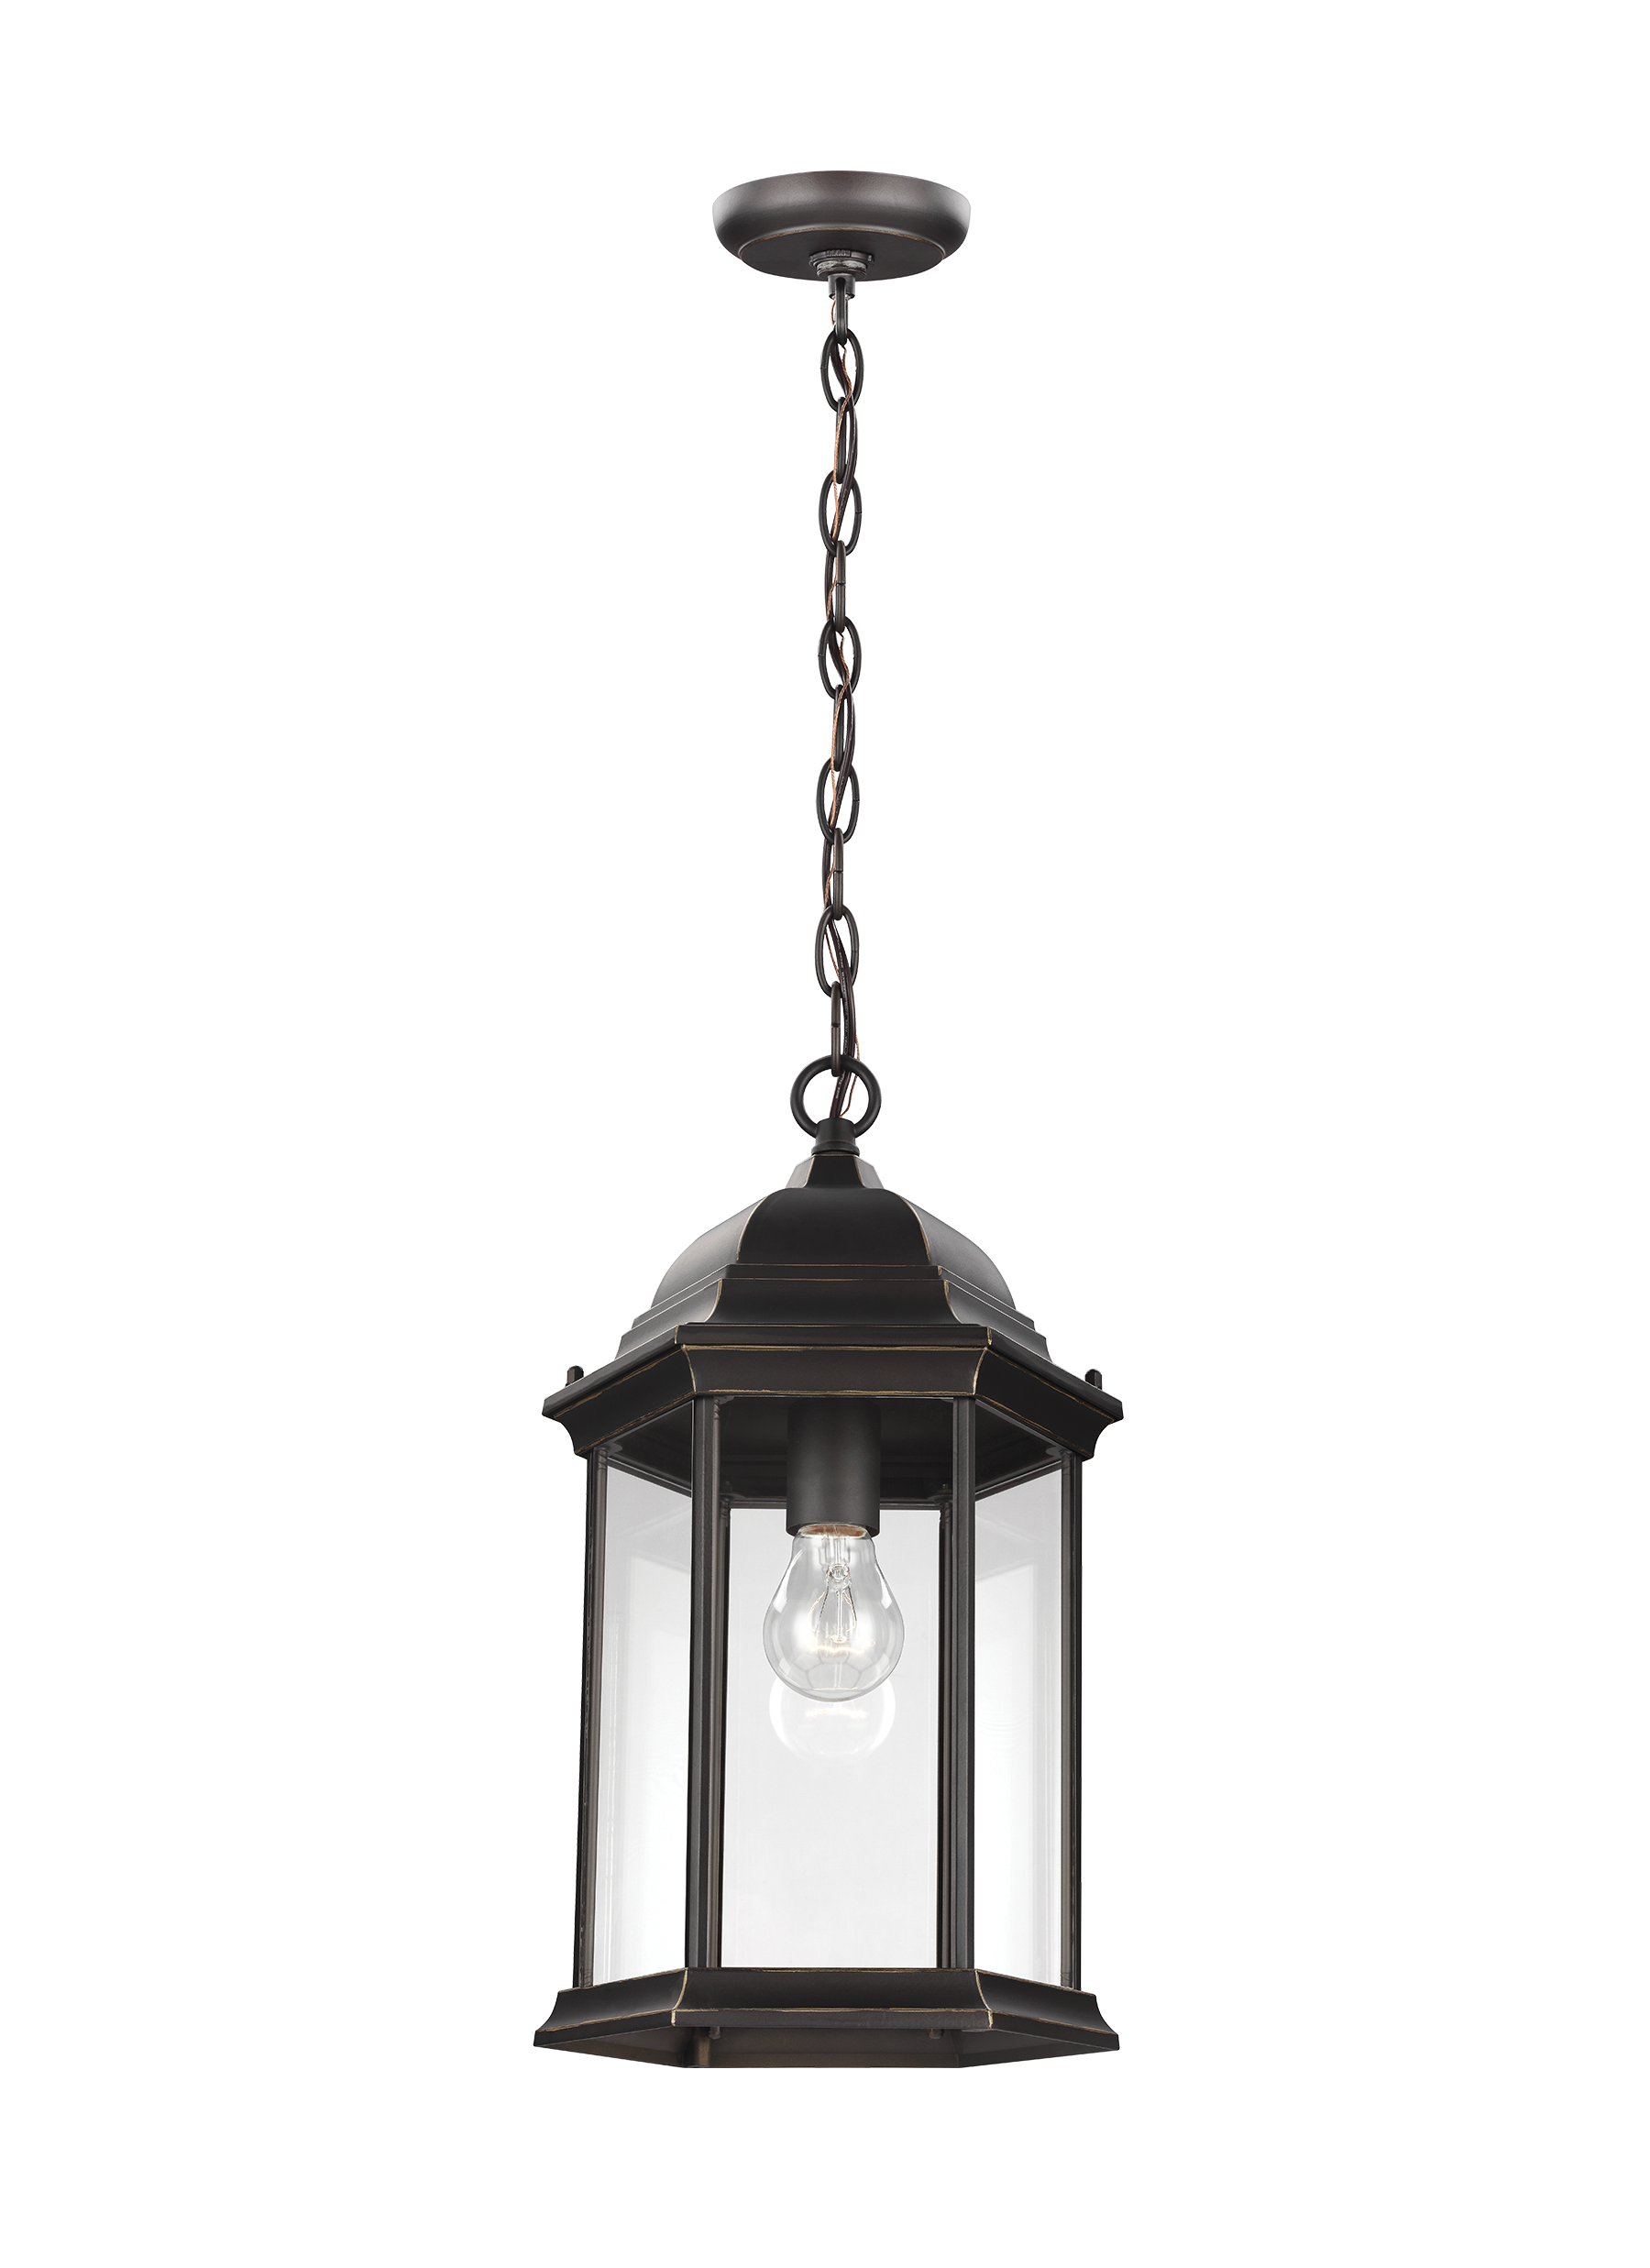 Sevier traditional 1-light outdoor exterior ceiling hanging pendant in antique bronze finish with clear glass panels